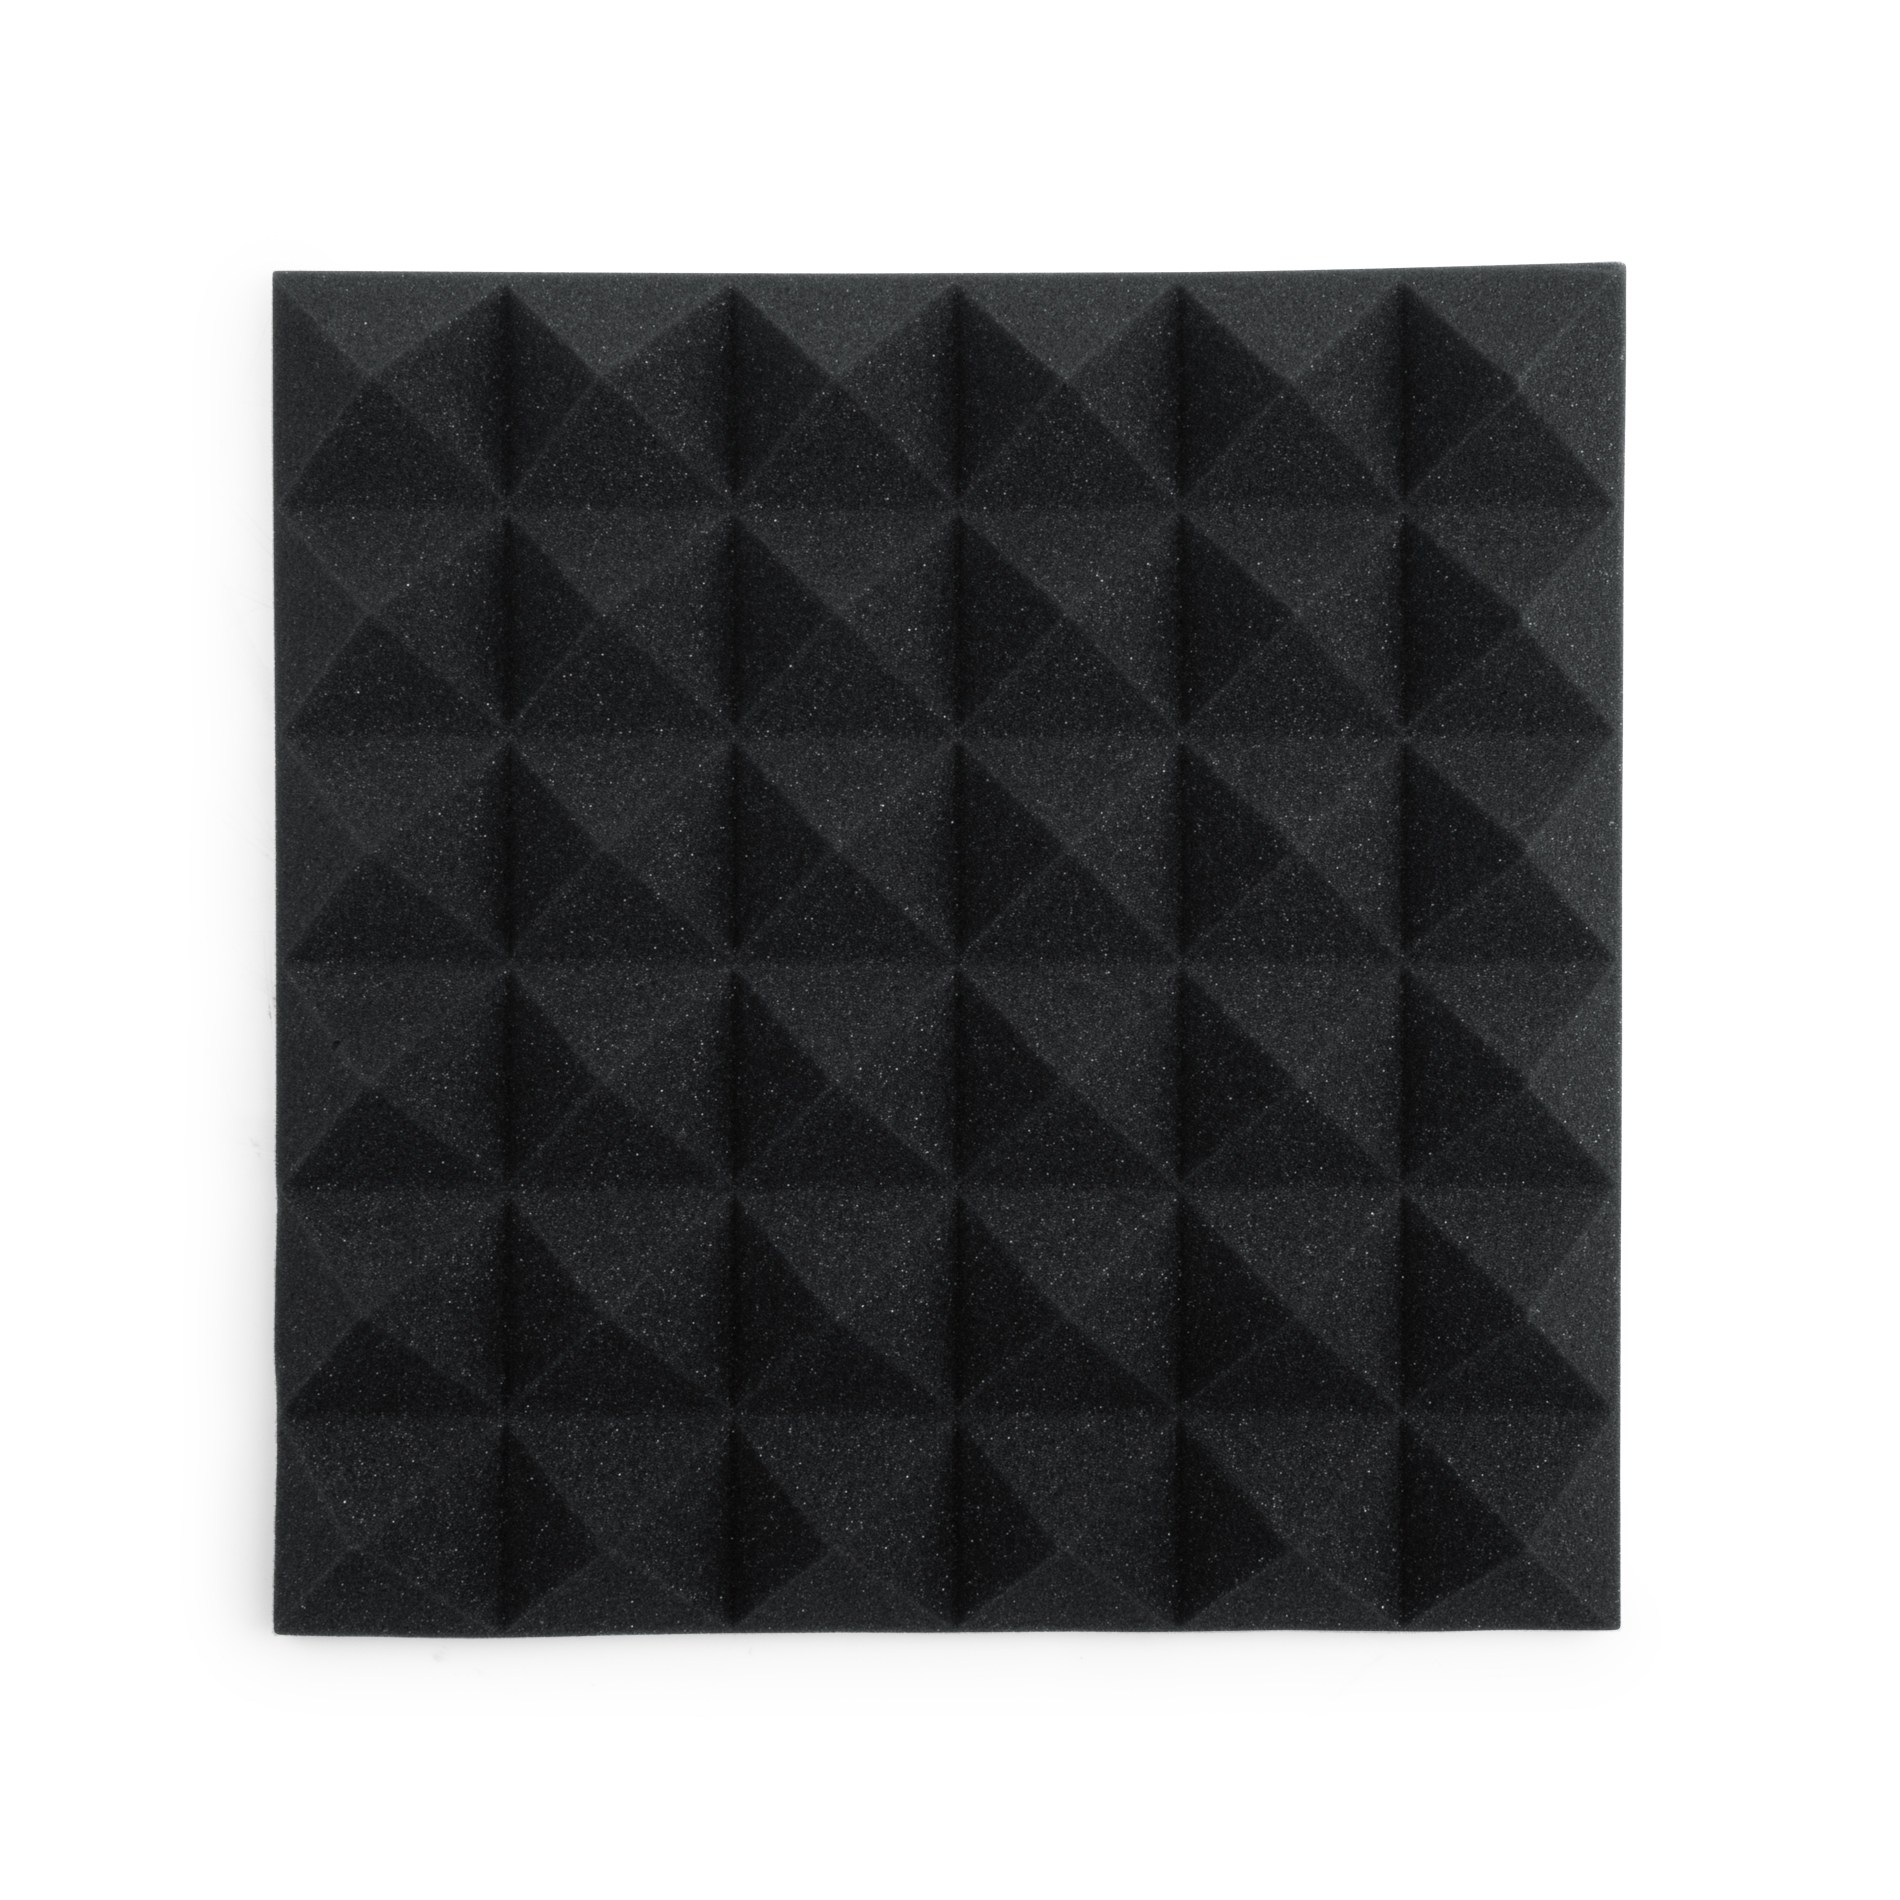 8 Pack of Charcoal 12×12″ Acoustic Pyramid Panel-GFW-ACPNL1212PCHA-8PK